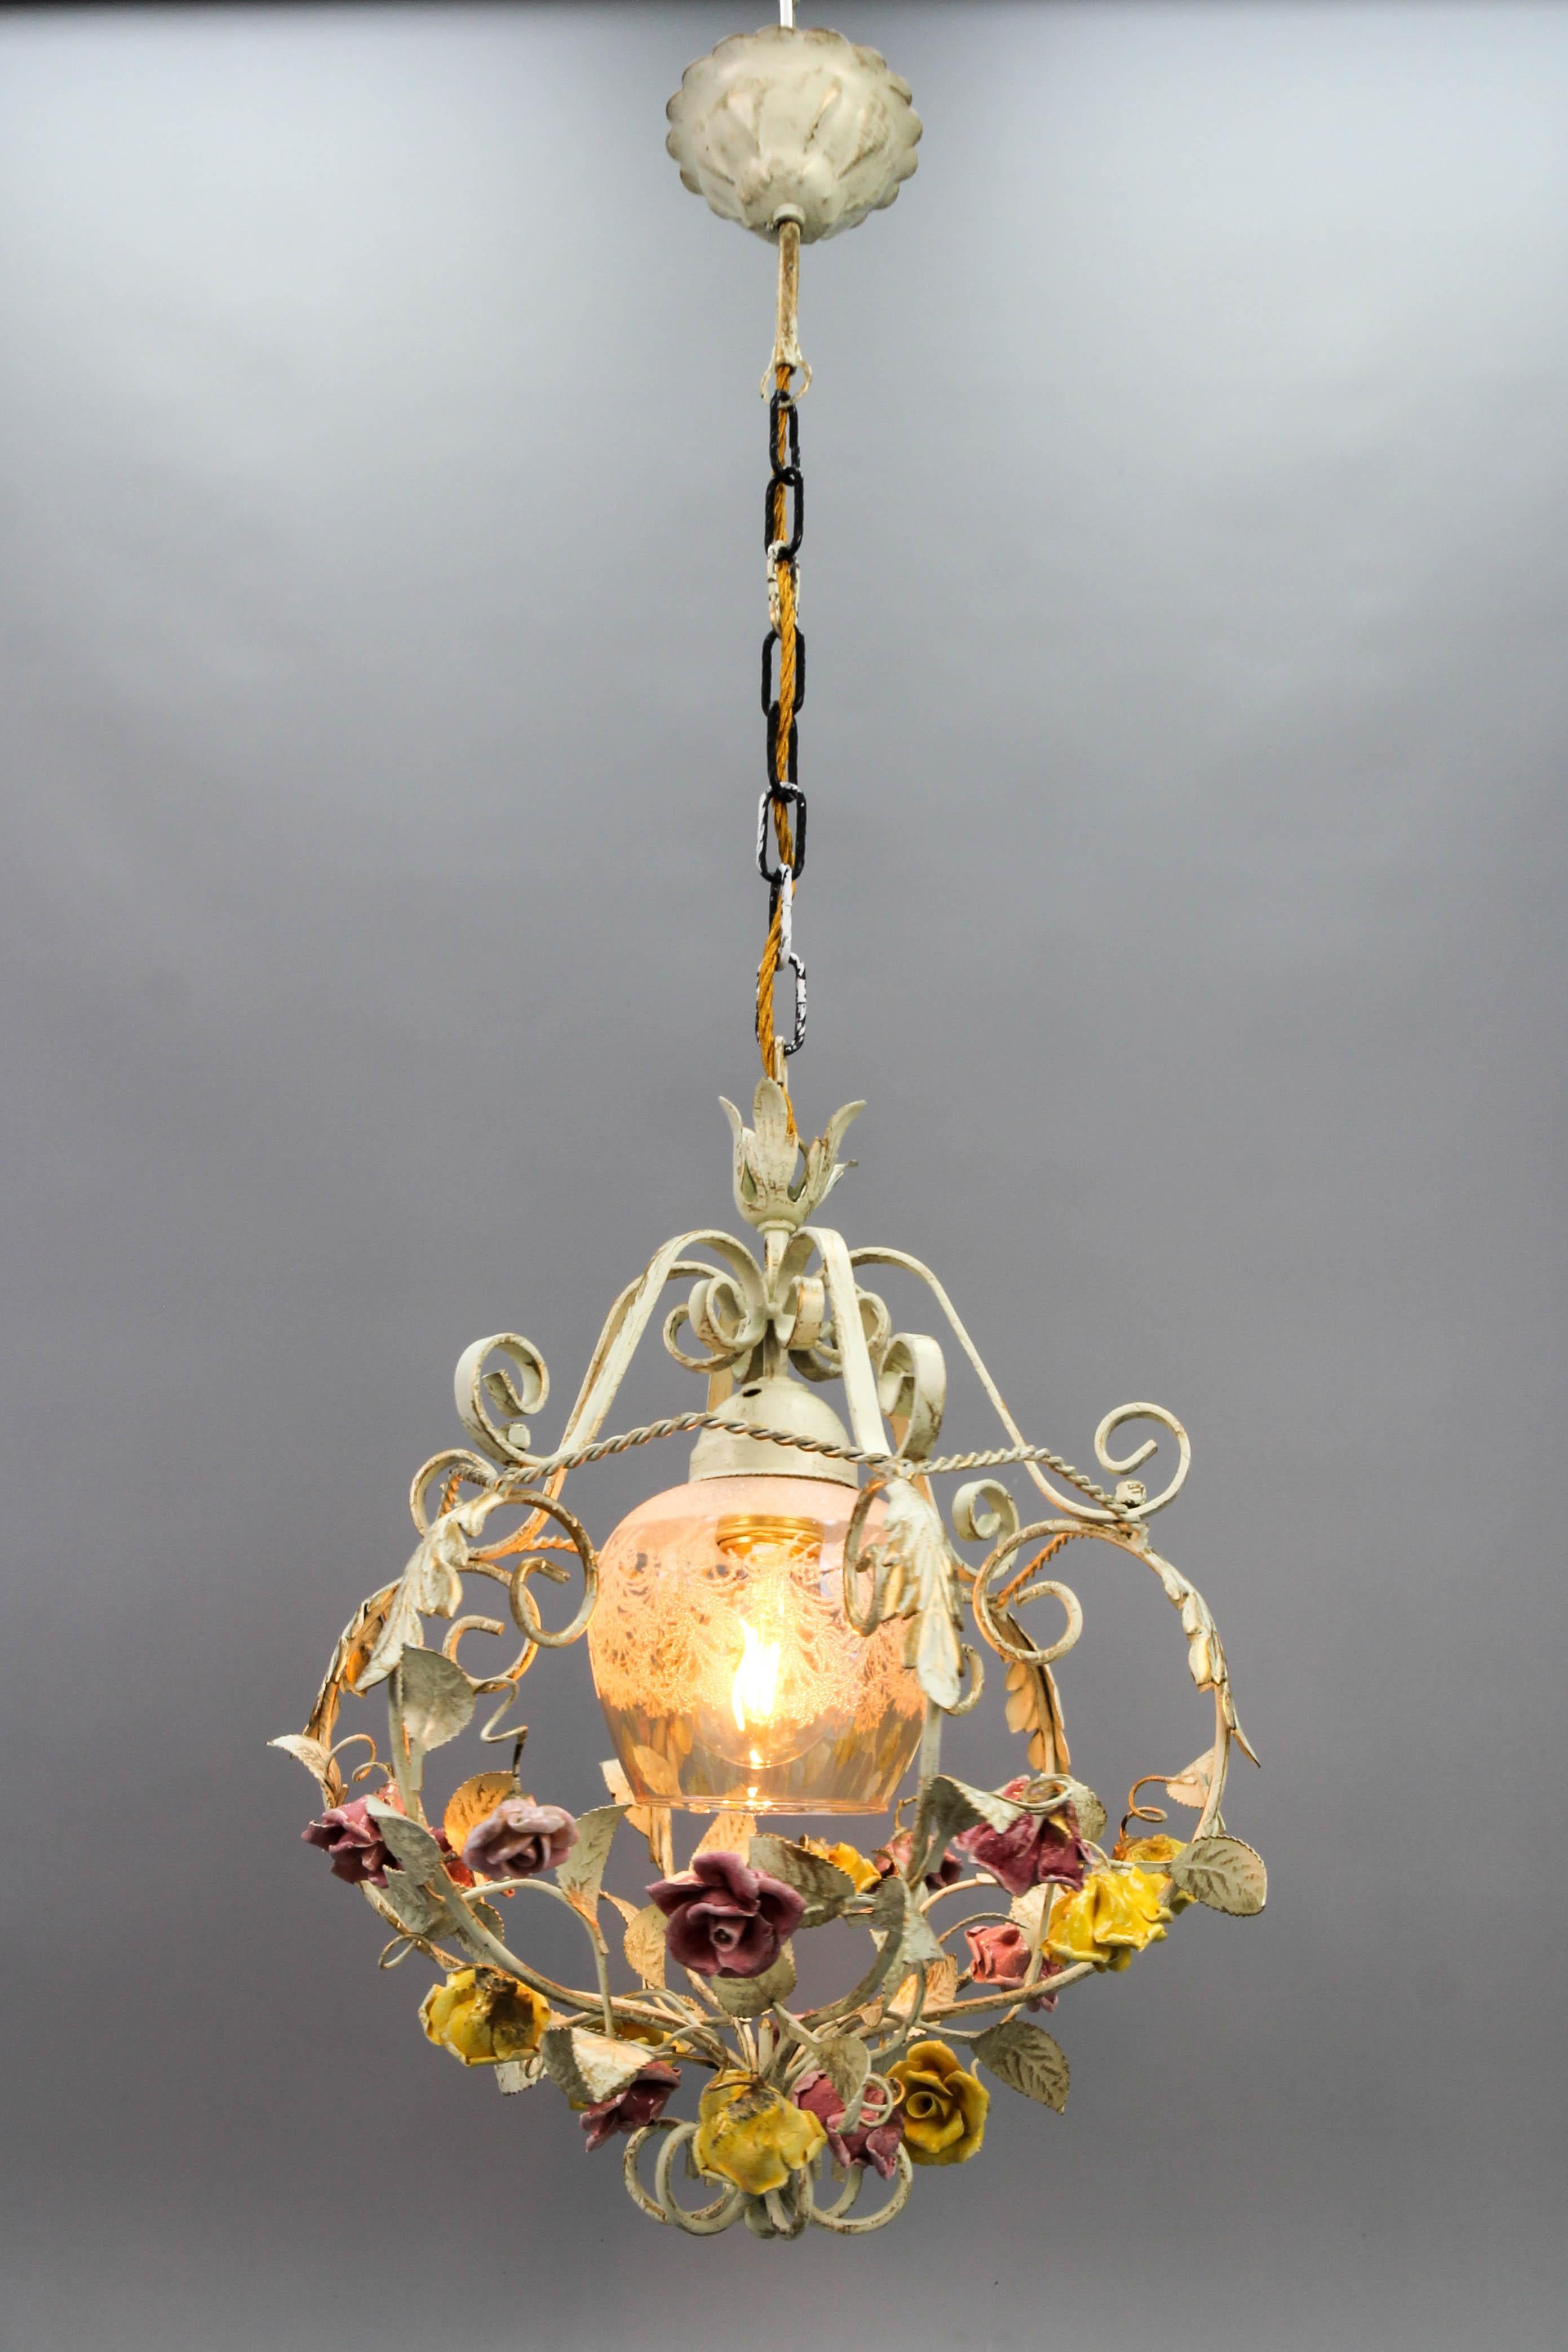 Painted Hollywood Regency Style Metal and Glass Chandelier with Porcelain Roses, 1970s For Sale